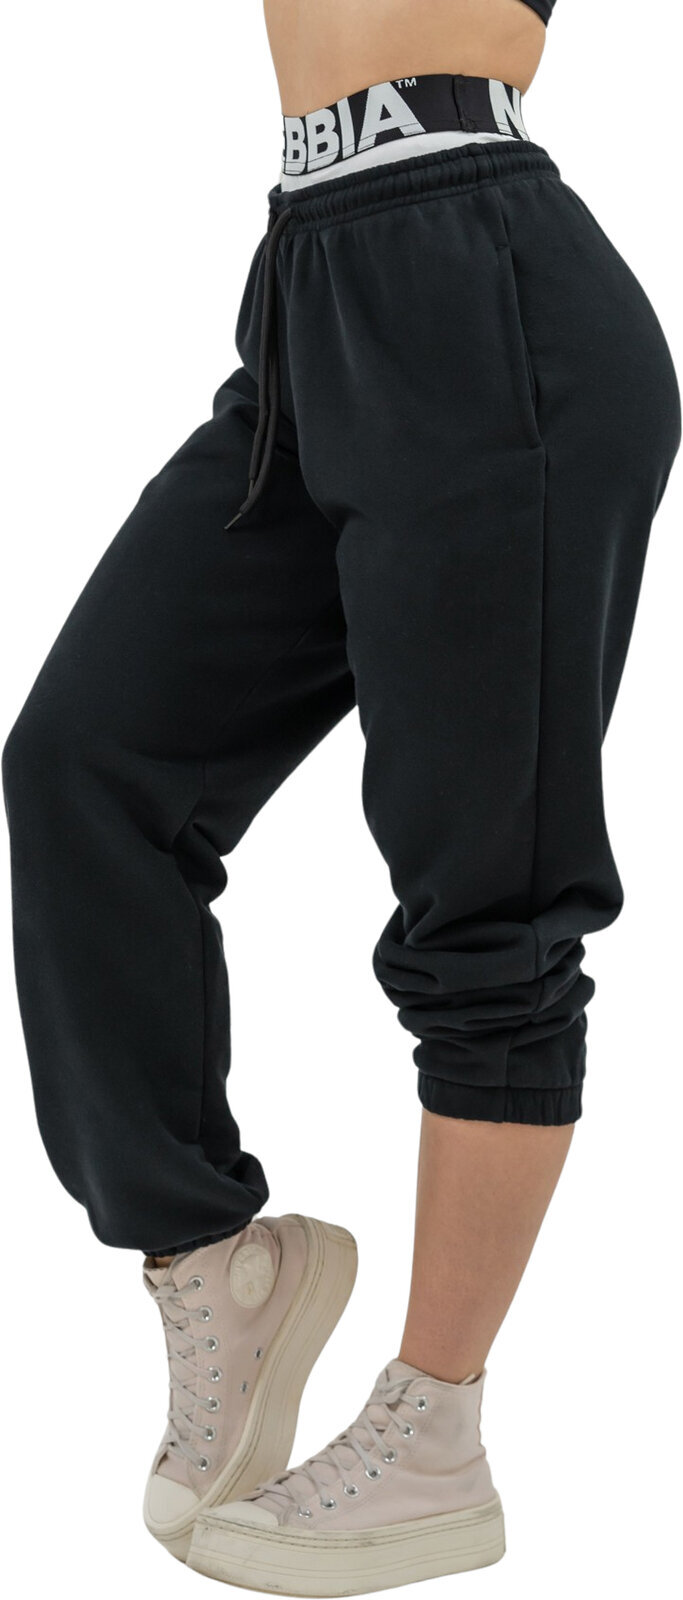 Fitness Trousers Nebbia Fitness Sweatpants Muscle Mommy Black XS Fitness Trousers